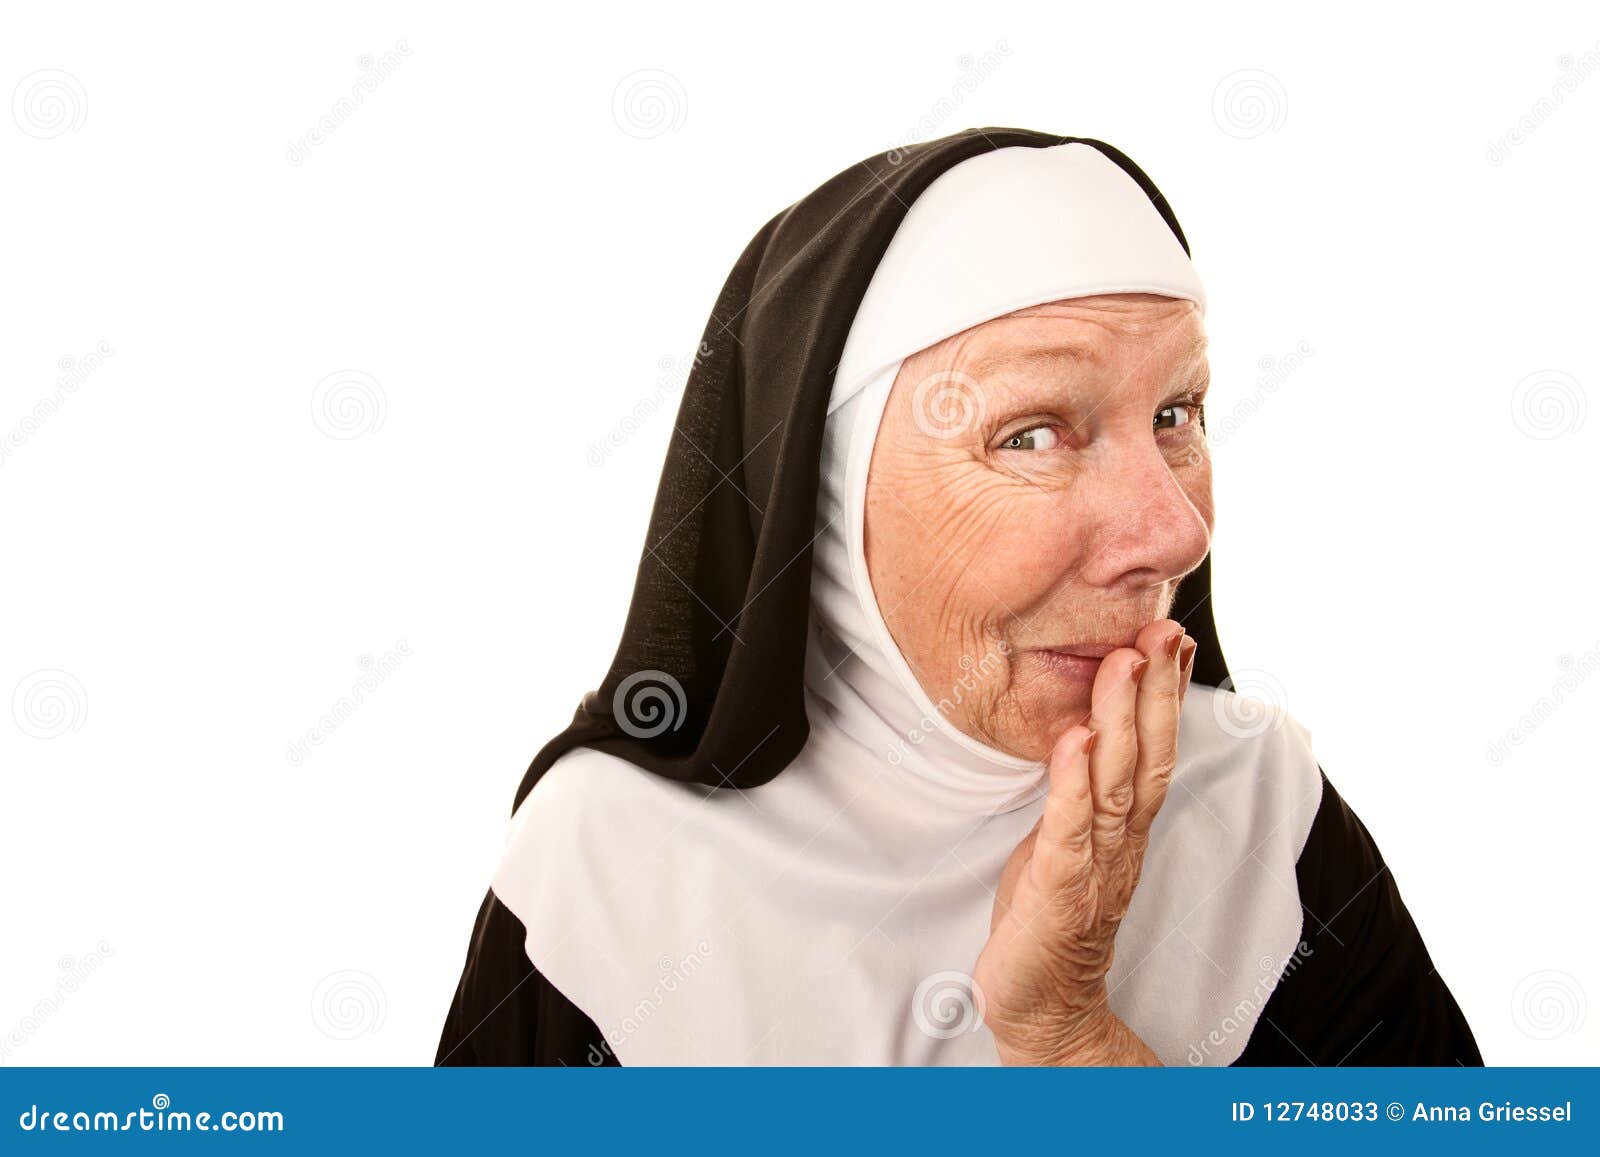 funny nun clipart images - photo #38